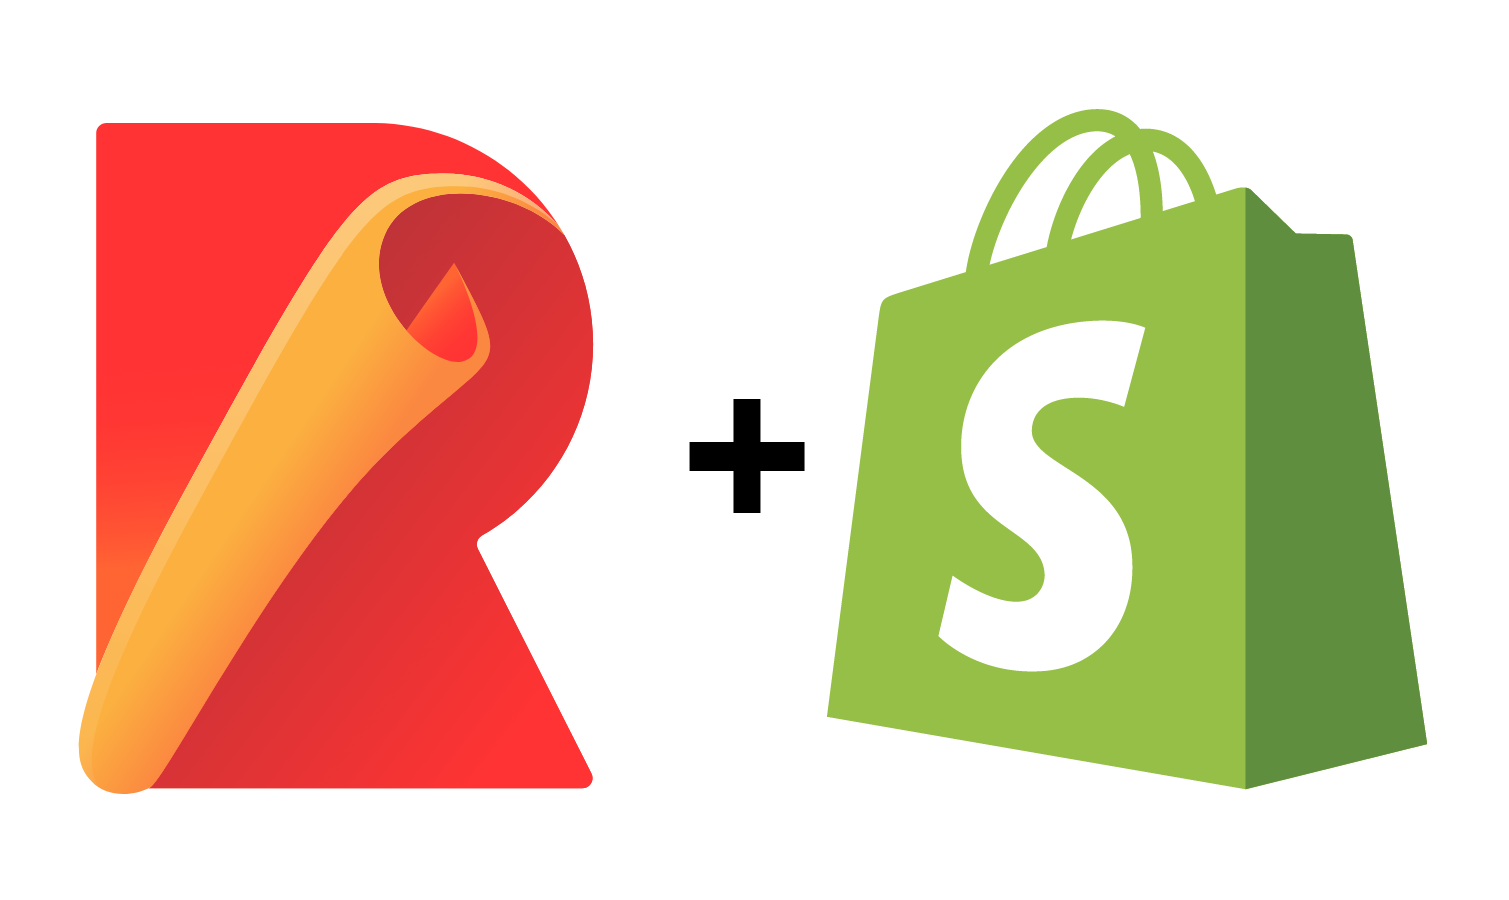 Shopify logo and Rollup logo